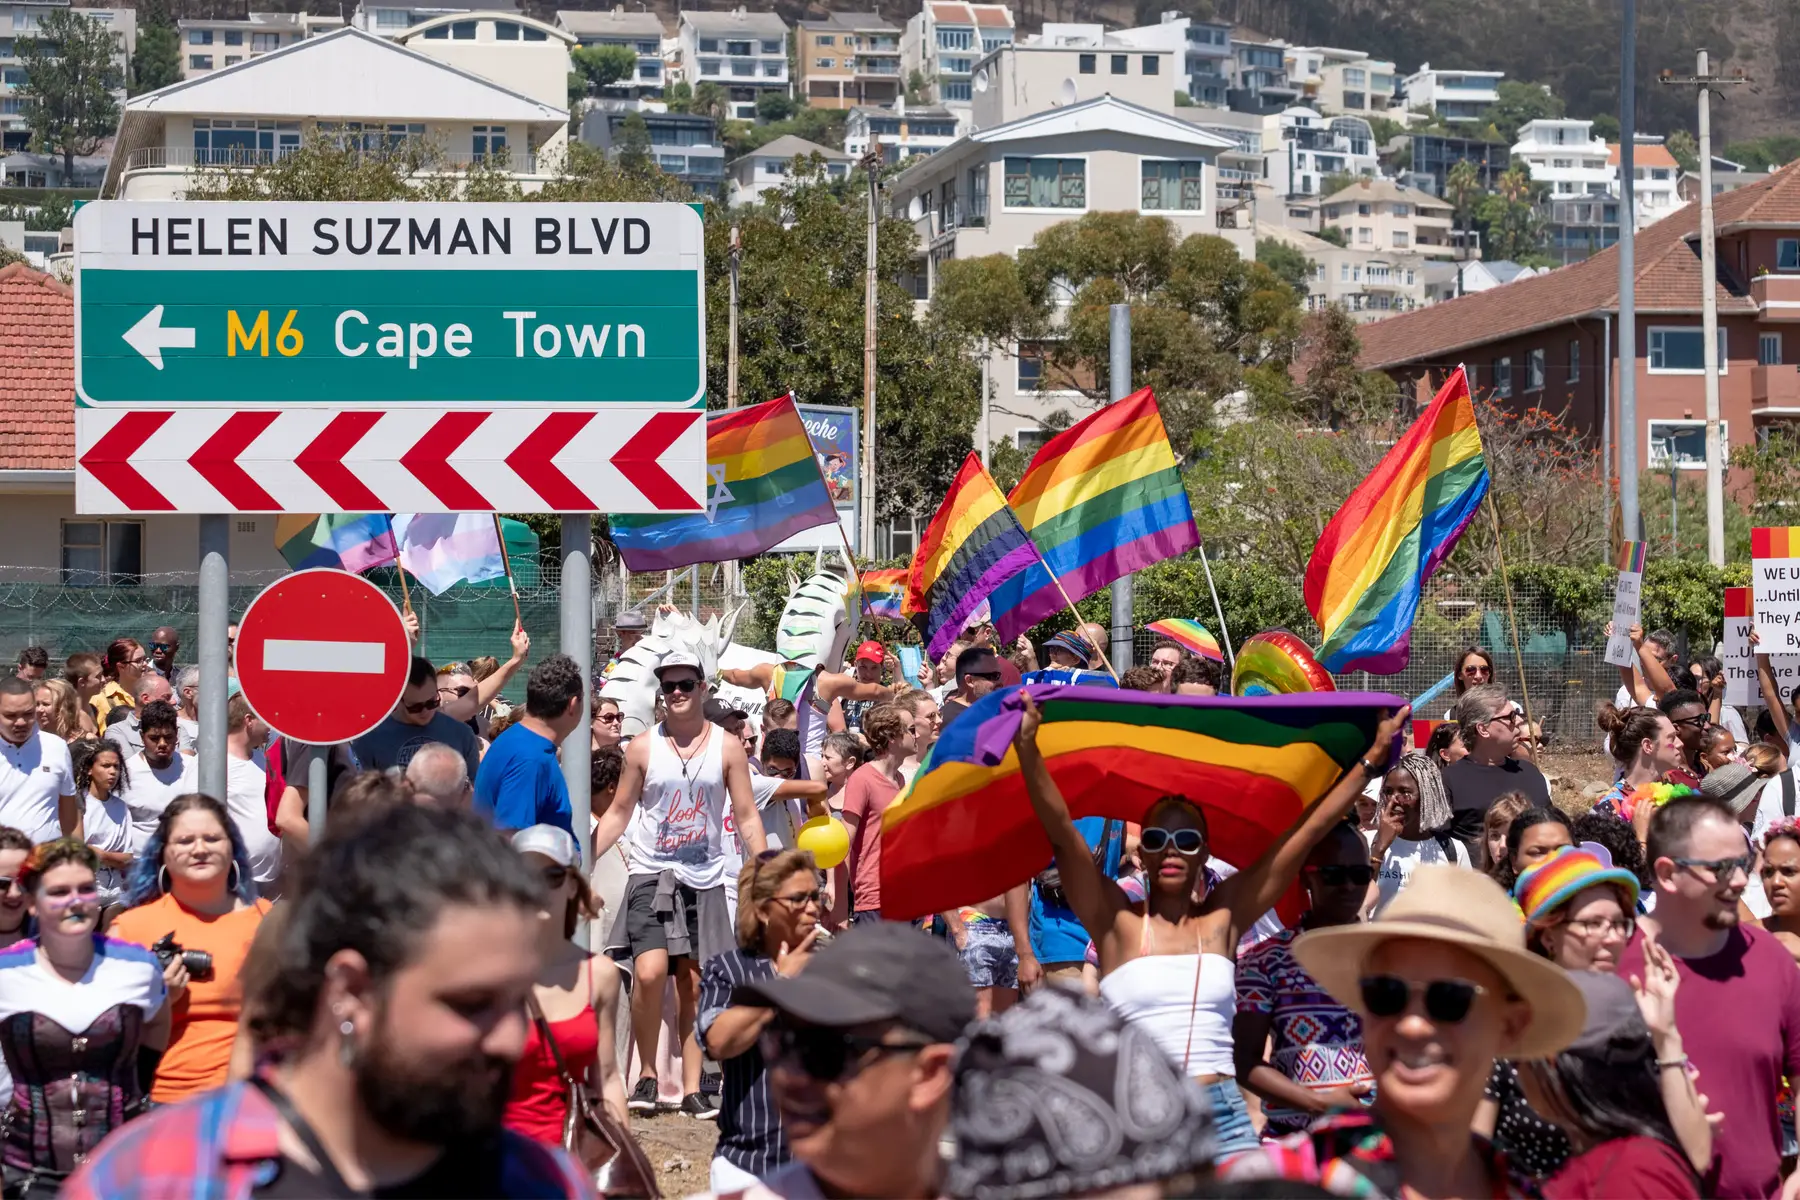 LGBTQ+ rights pride parade in Cape Town,. South Africa